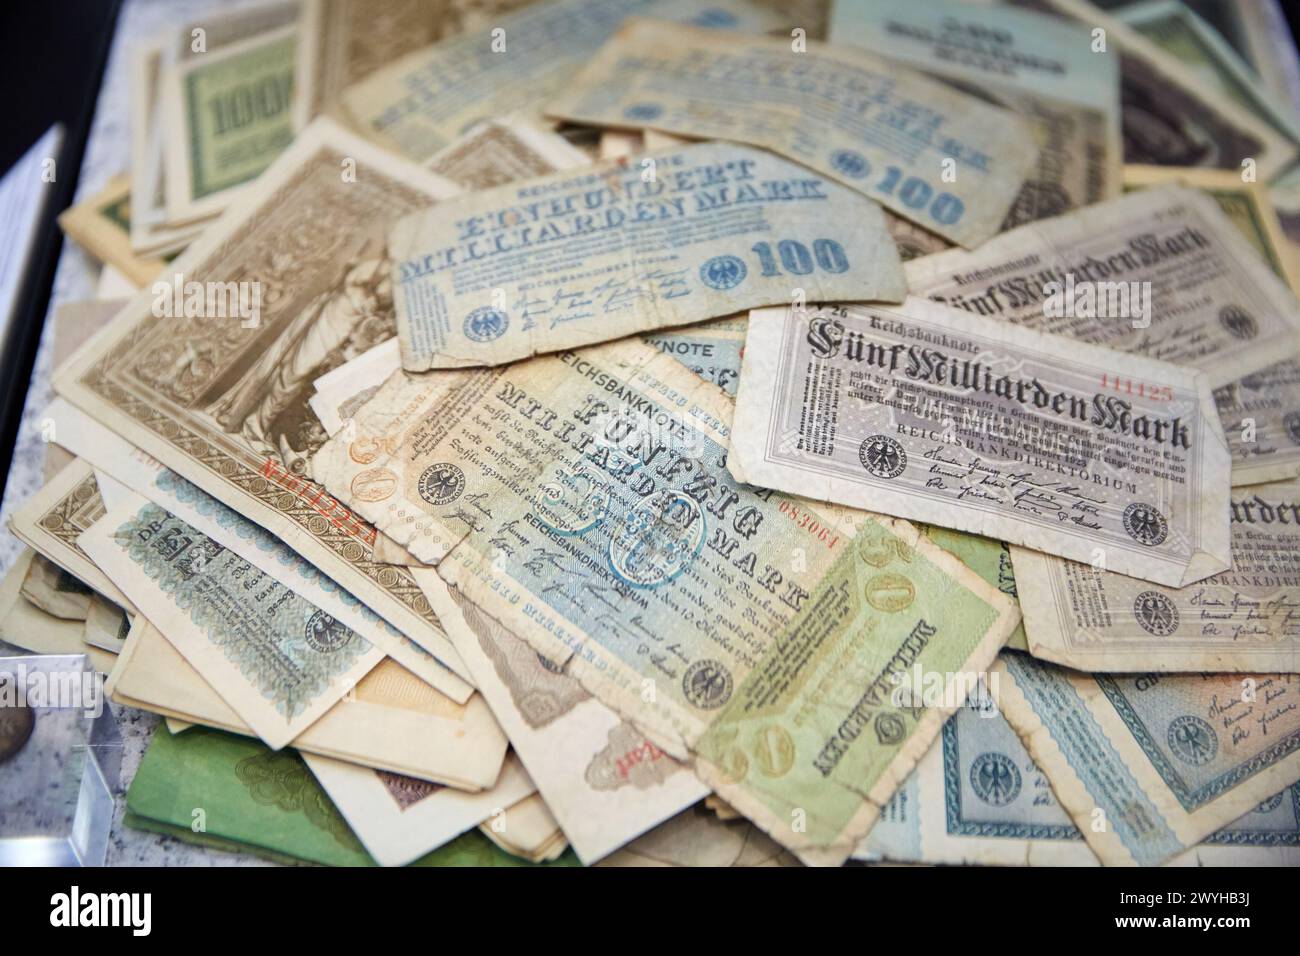 Banknotes of the period of inflation, 1923, Deutsches Historisches Museum, Berlin, Germany. Stock Photo